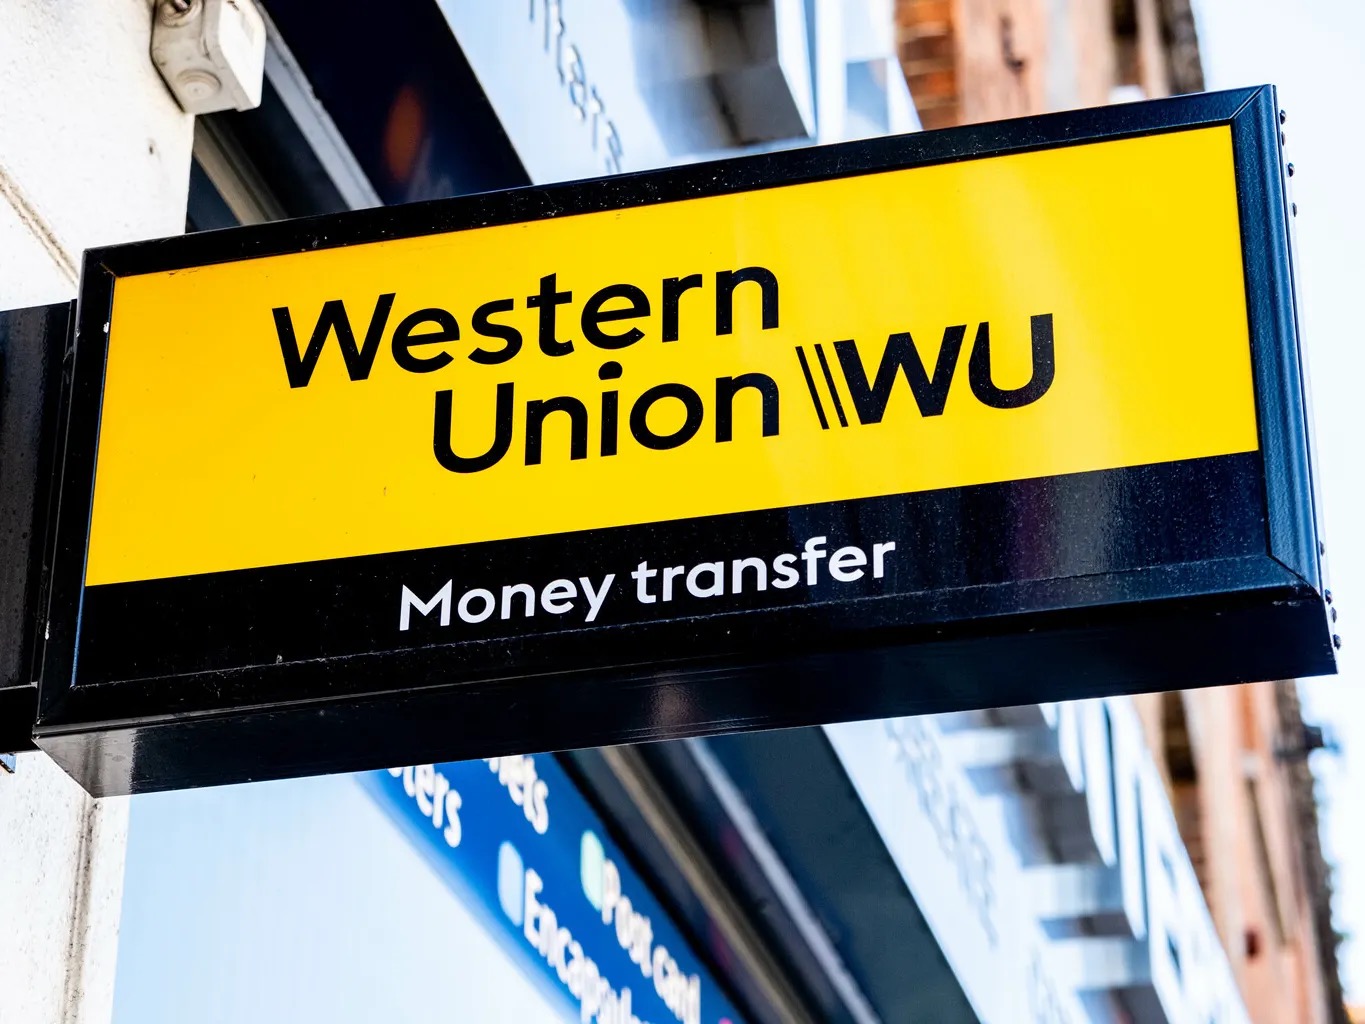 A Guide To Western Union's US Stores